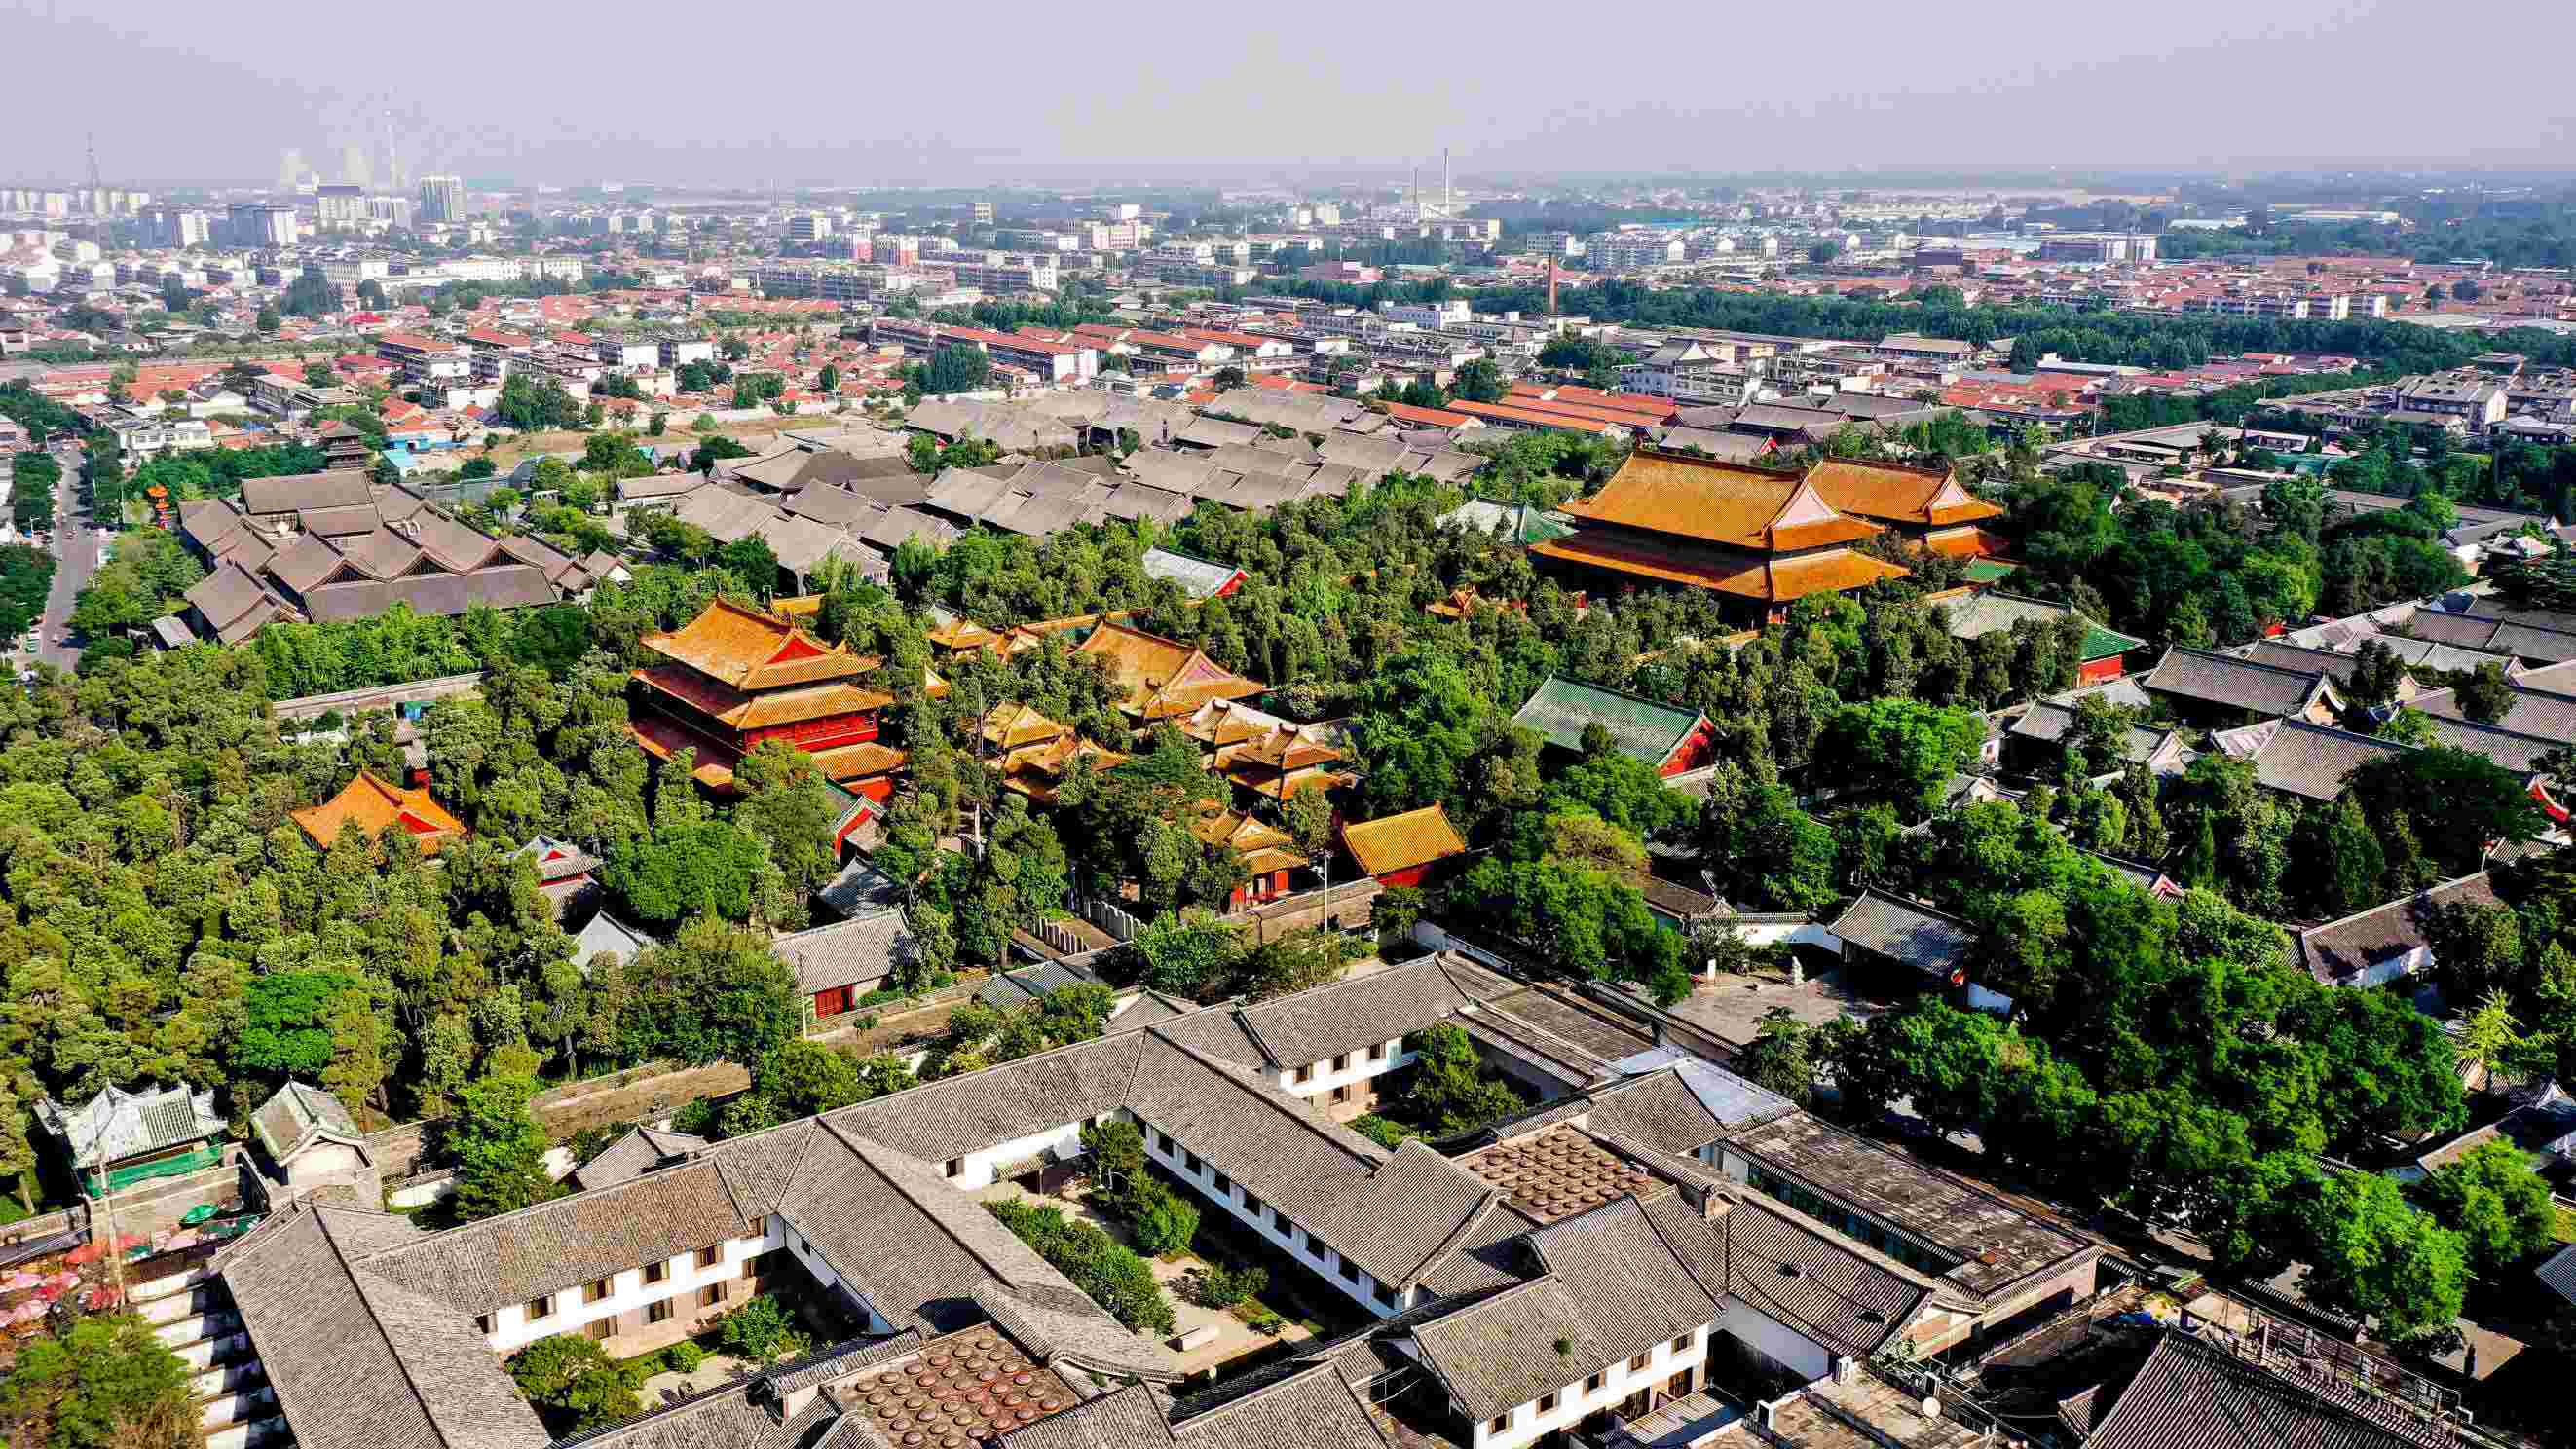 Decoding City Samples of Cultural Confidence | Civility in Zisheng for Thousands of Years - Decoding Cultural Confidence Samples of Qufu, the Hometown of Confucius | Civilization | World | Culture